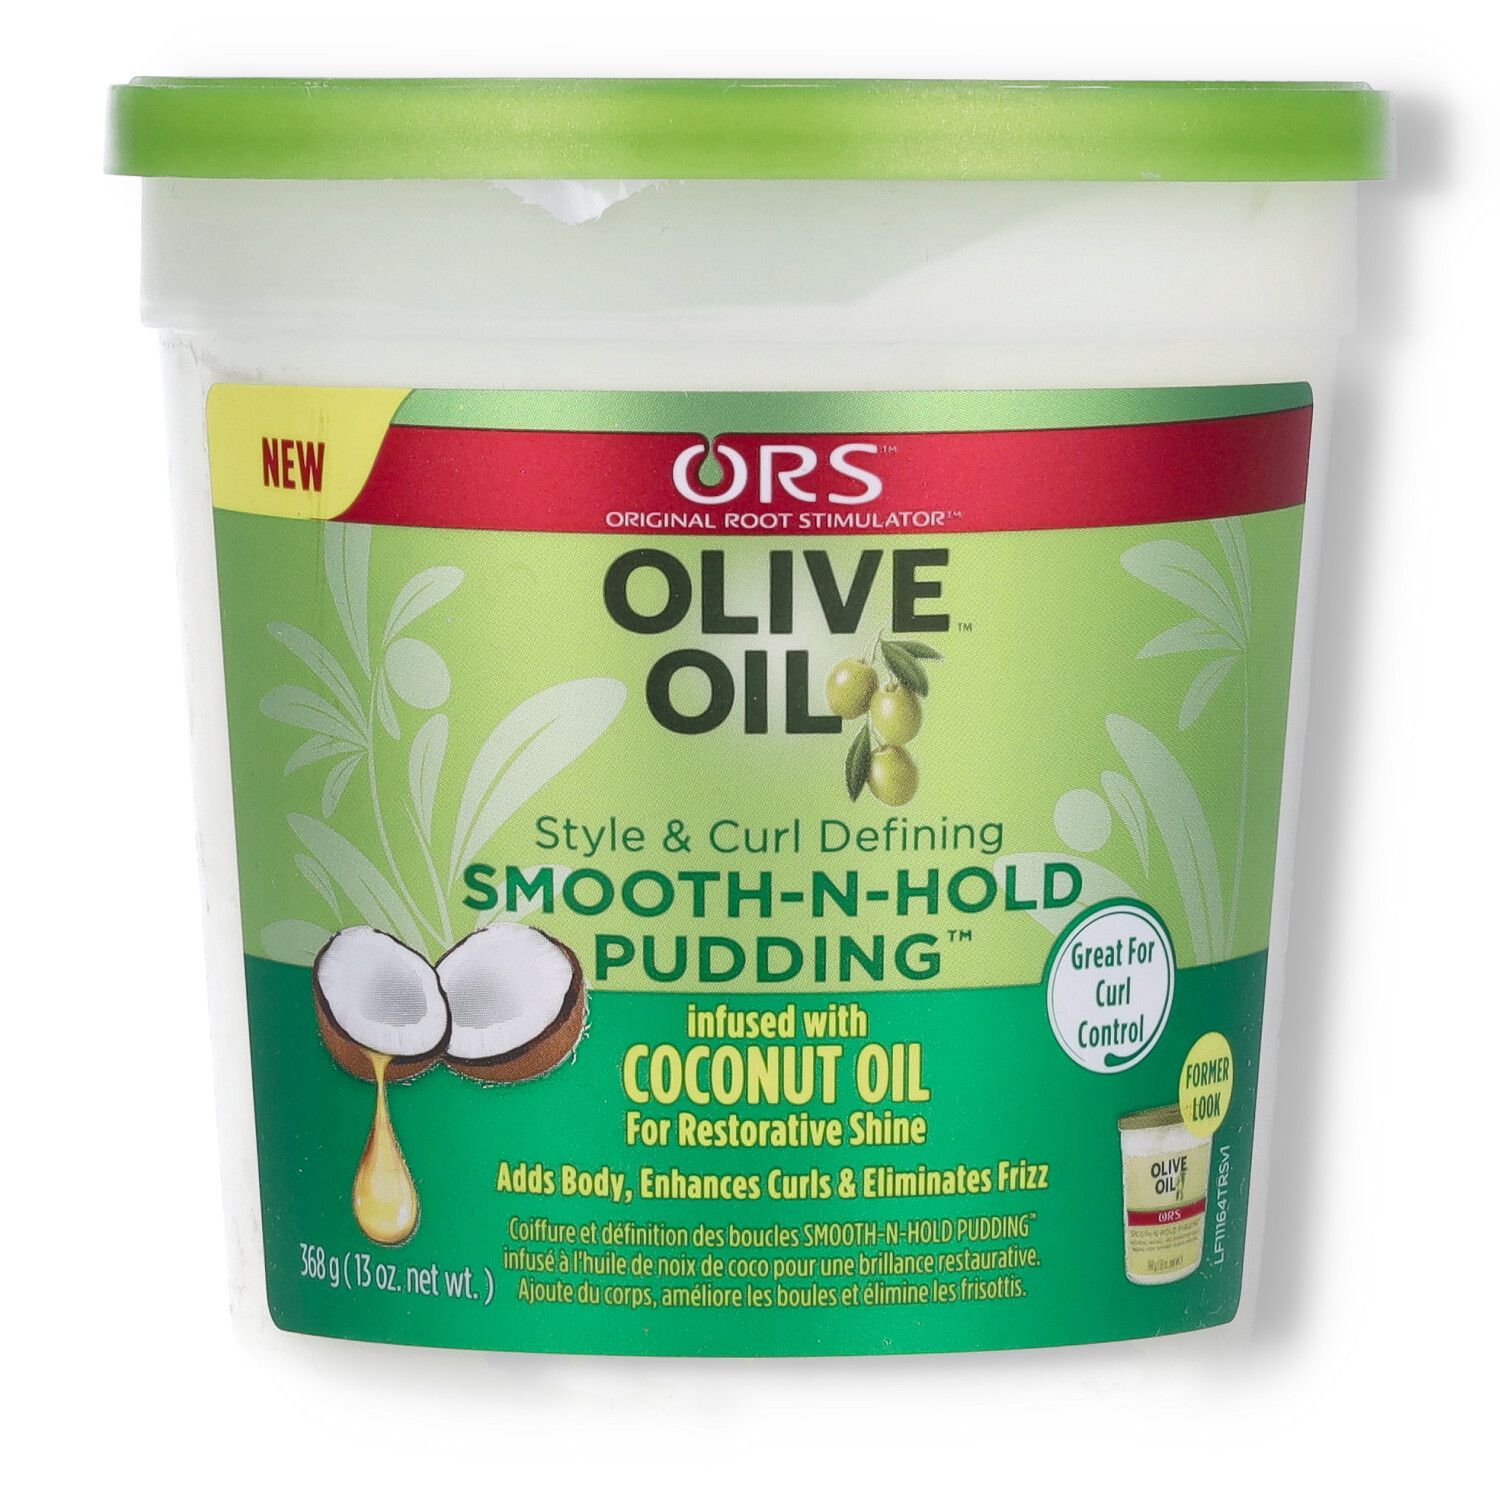 ORS Olive Oil Smooth-n-hold Pudding - 13oz